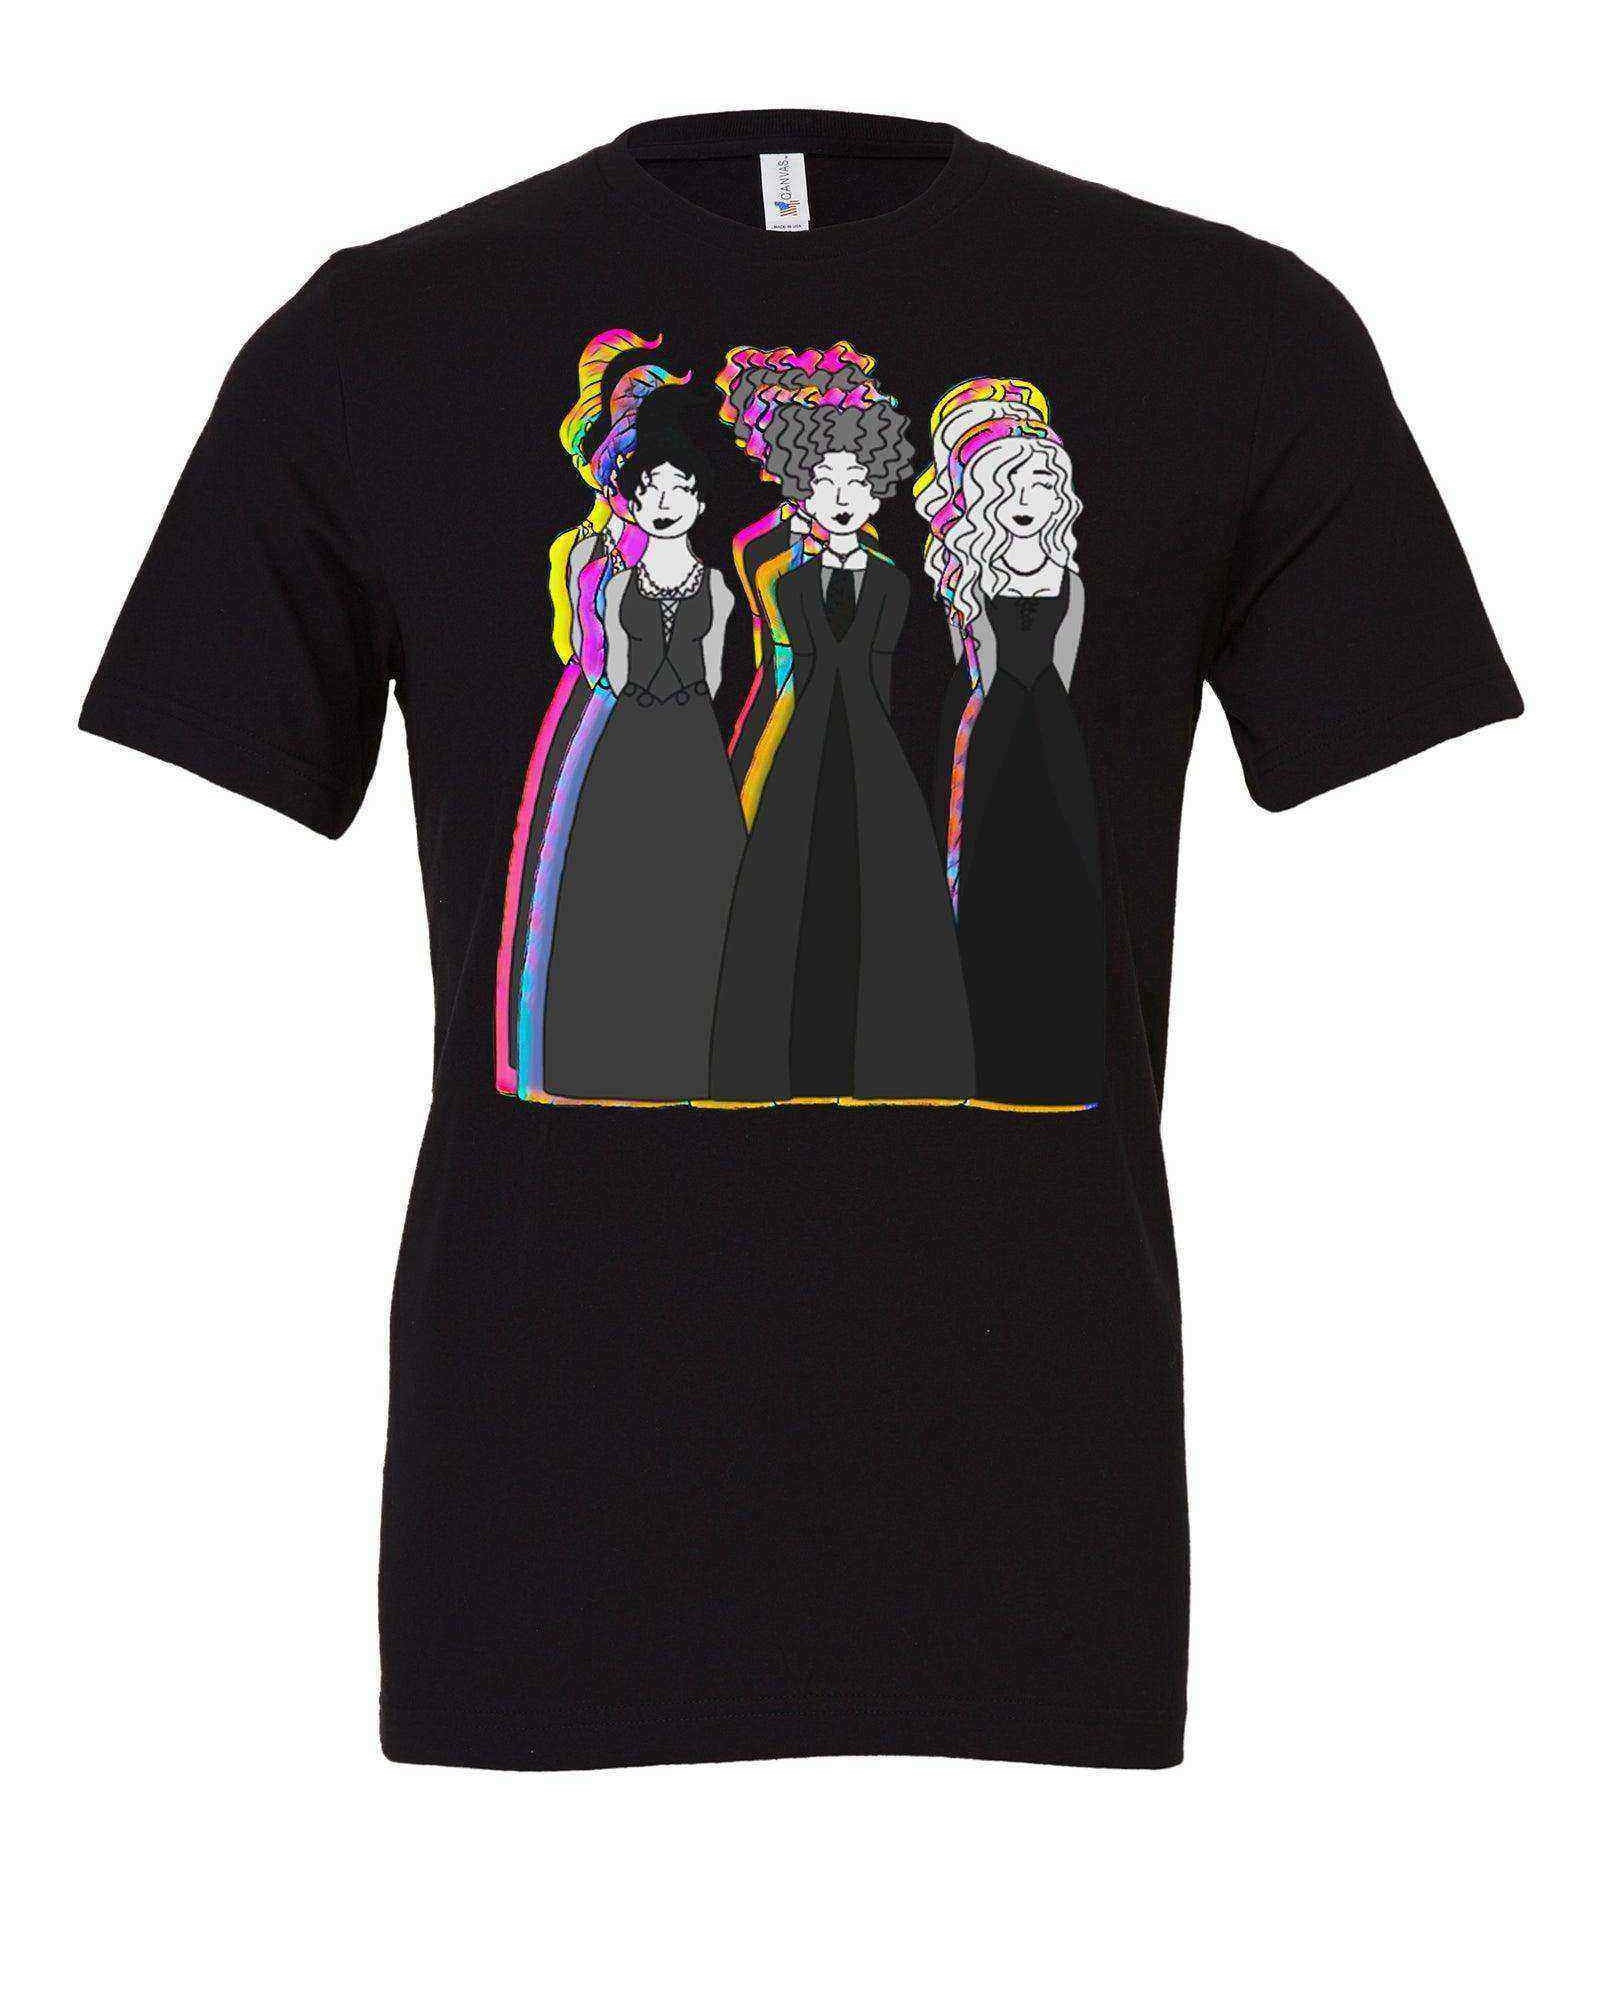 Three Witches Shirt | Halloween - Dylan's Tees